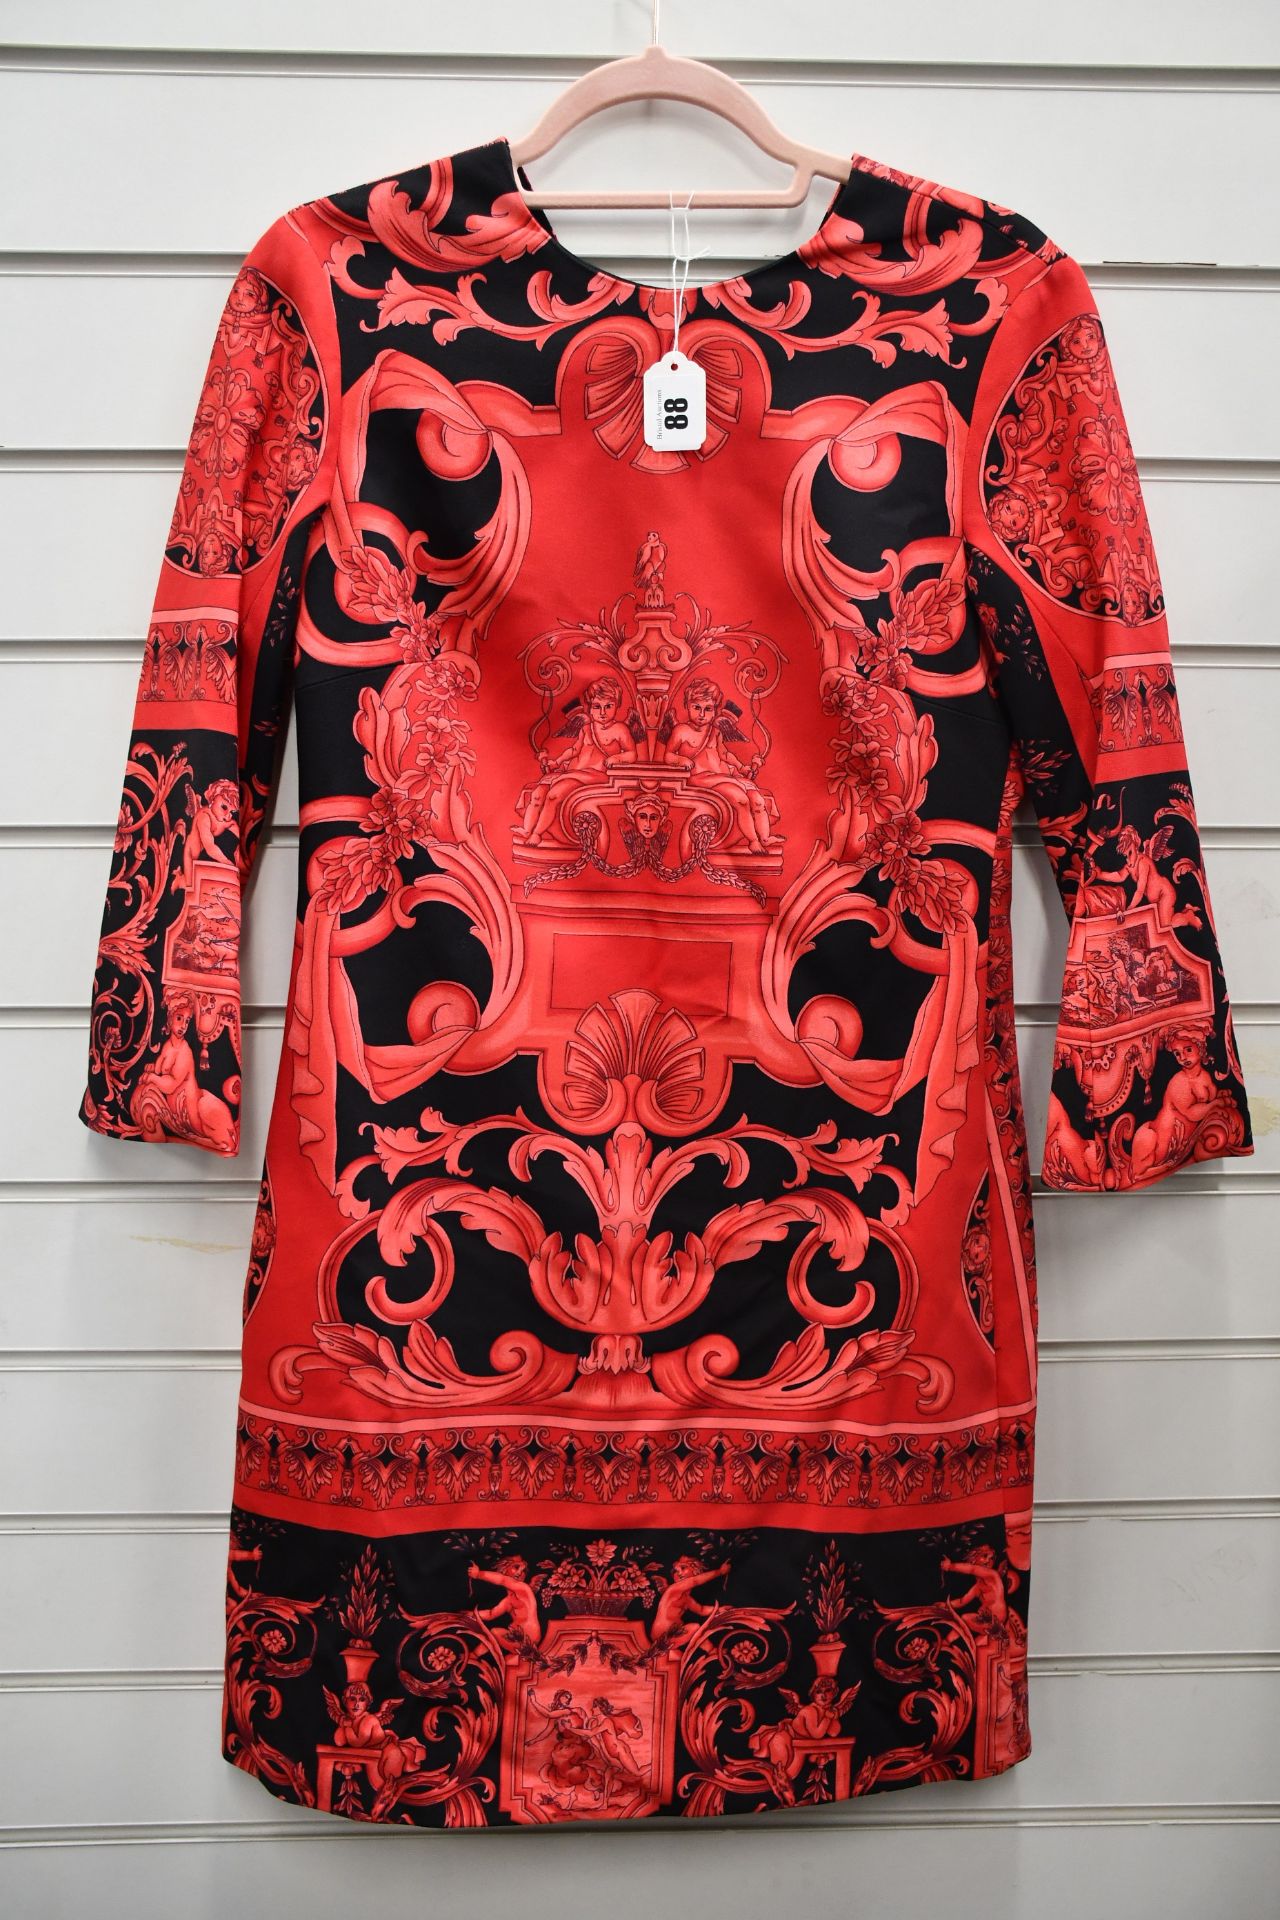 An as new Versace woven dress in black/red (Size 40 - RRP £650).